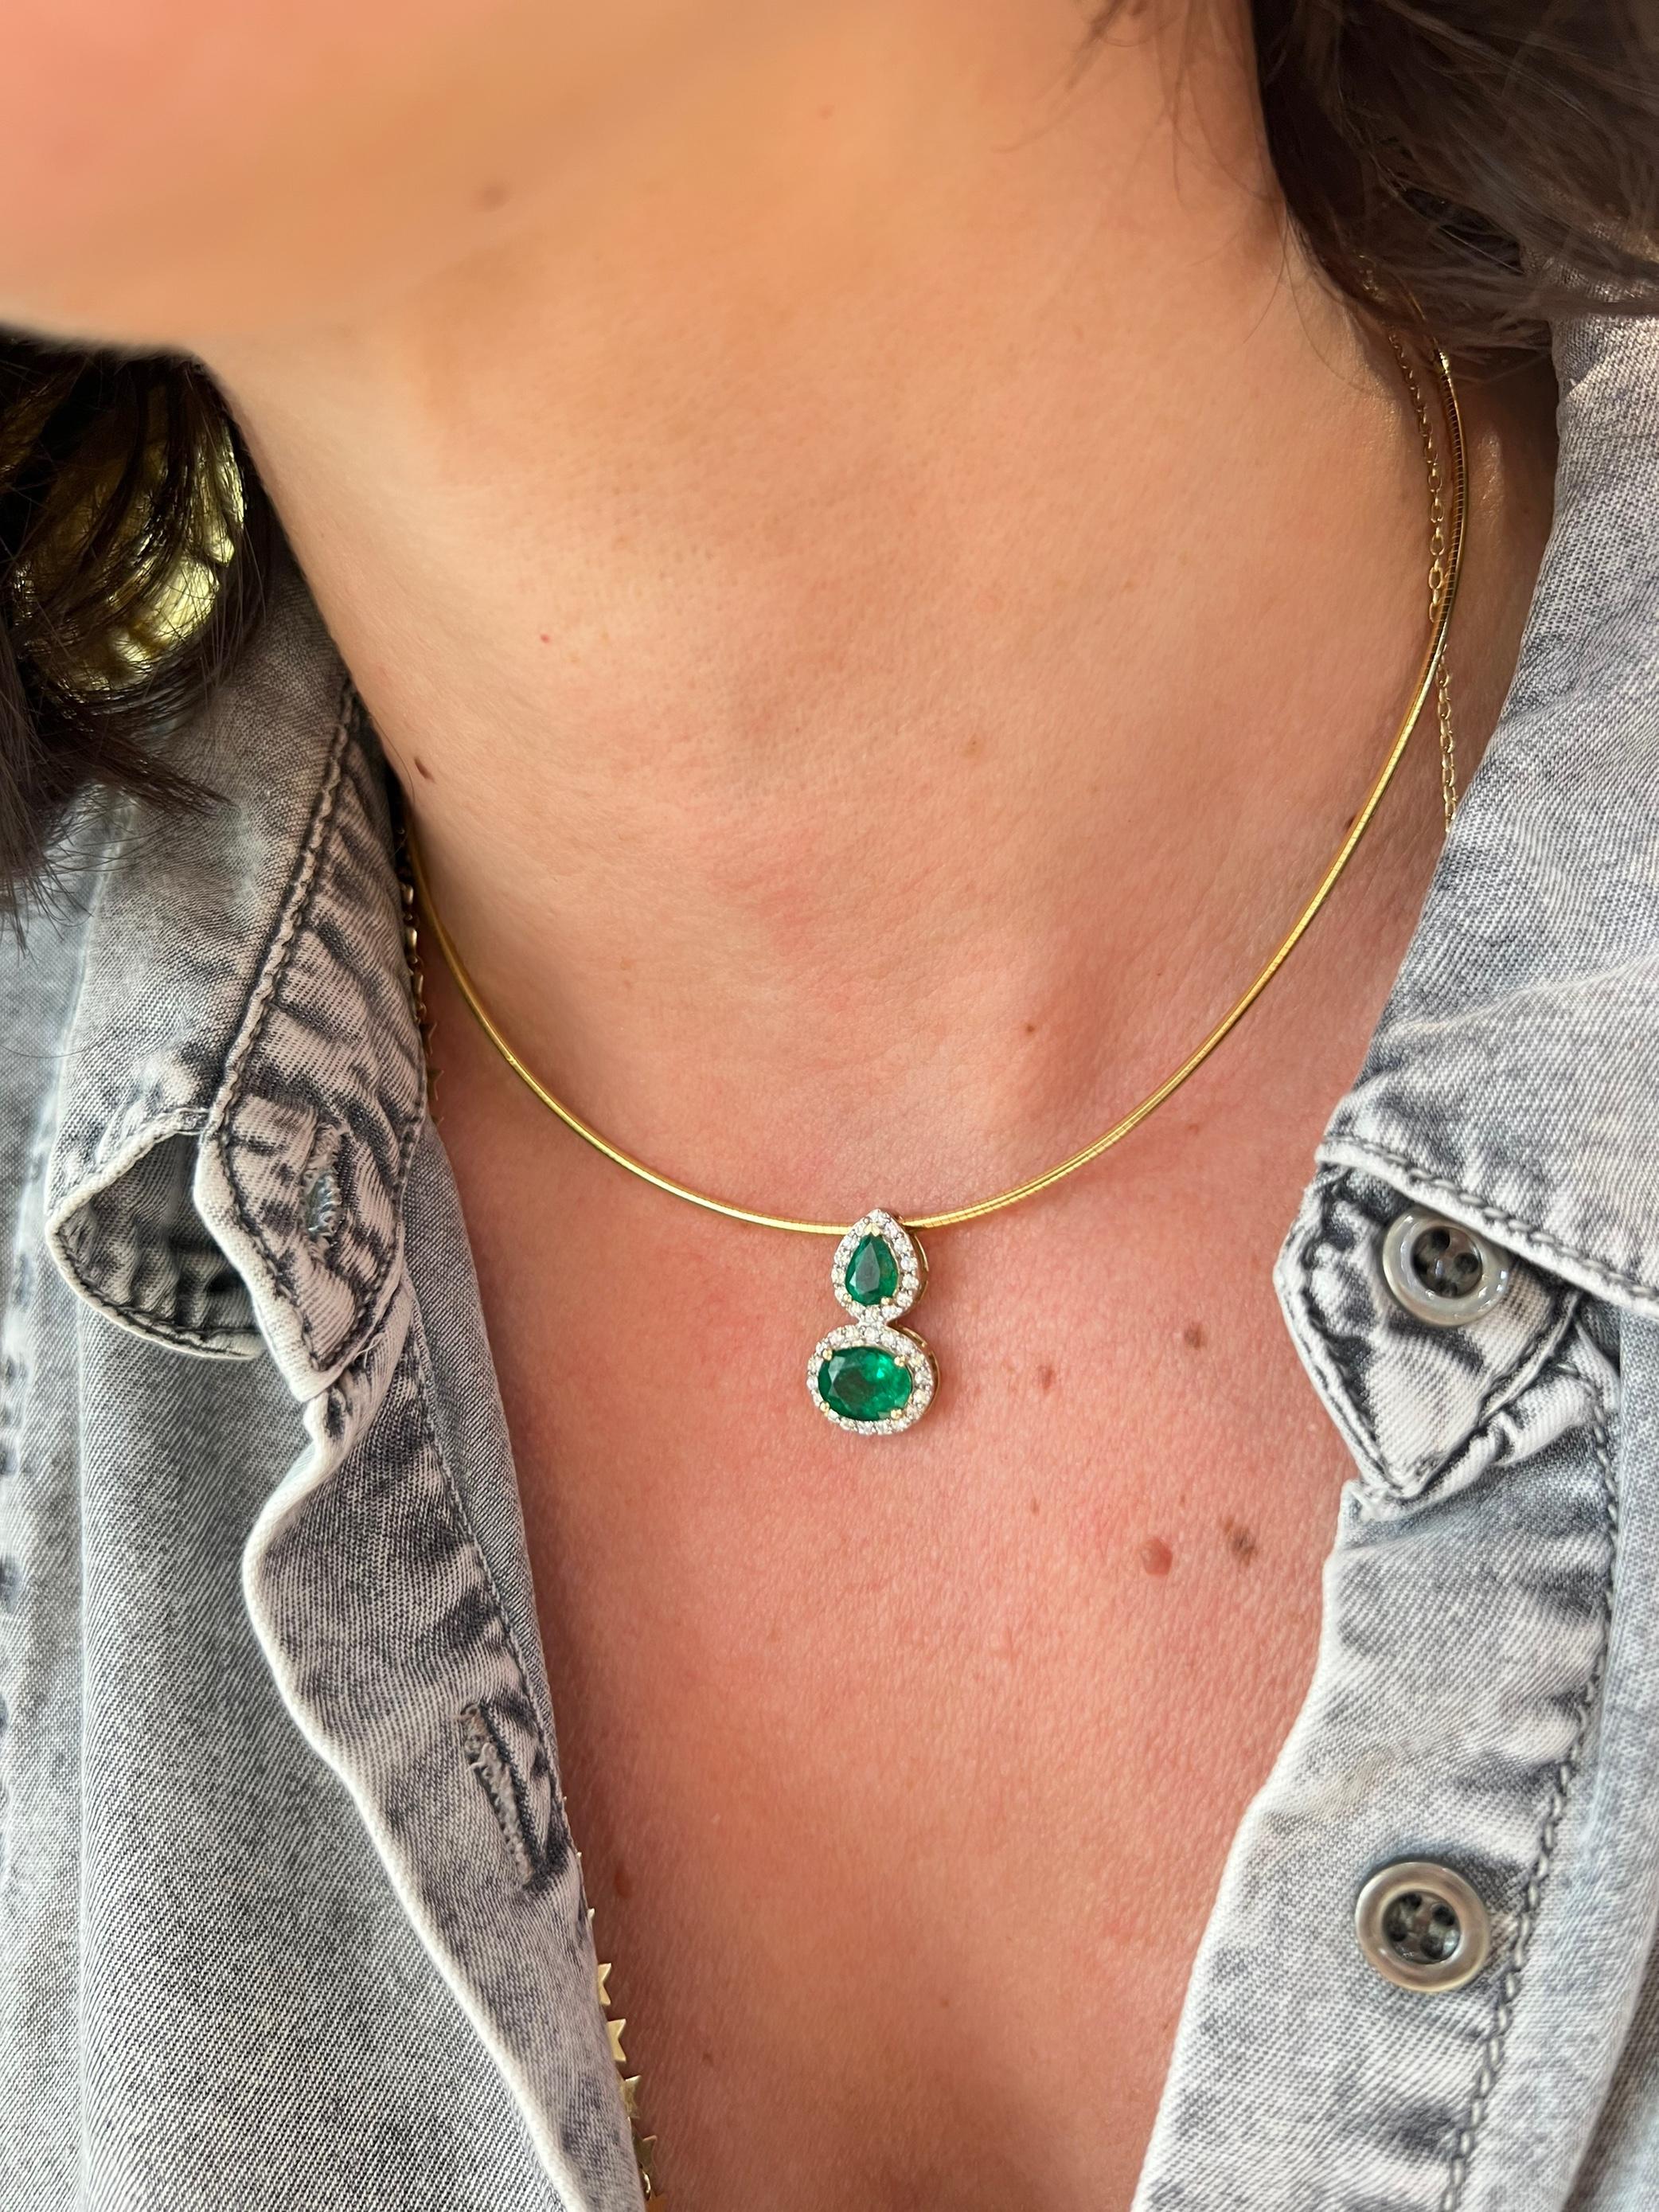 14K yellow gold omega chain necklace with 2 stone emerald pendant.

Features

14k yellow gold
2.39 carat total weight emeralds.
The oval emerald measures approx. 9x7mm
the pear shape emerald measures  approx. 7x 5 mm
.16 carat total weight in